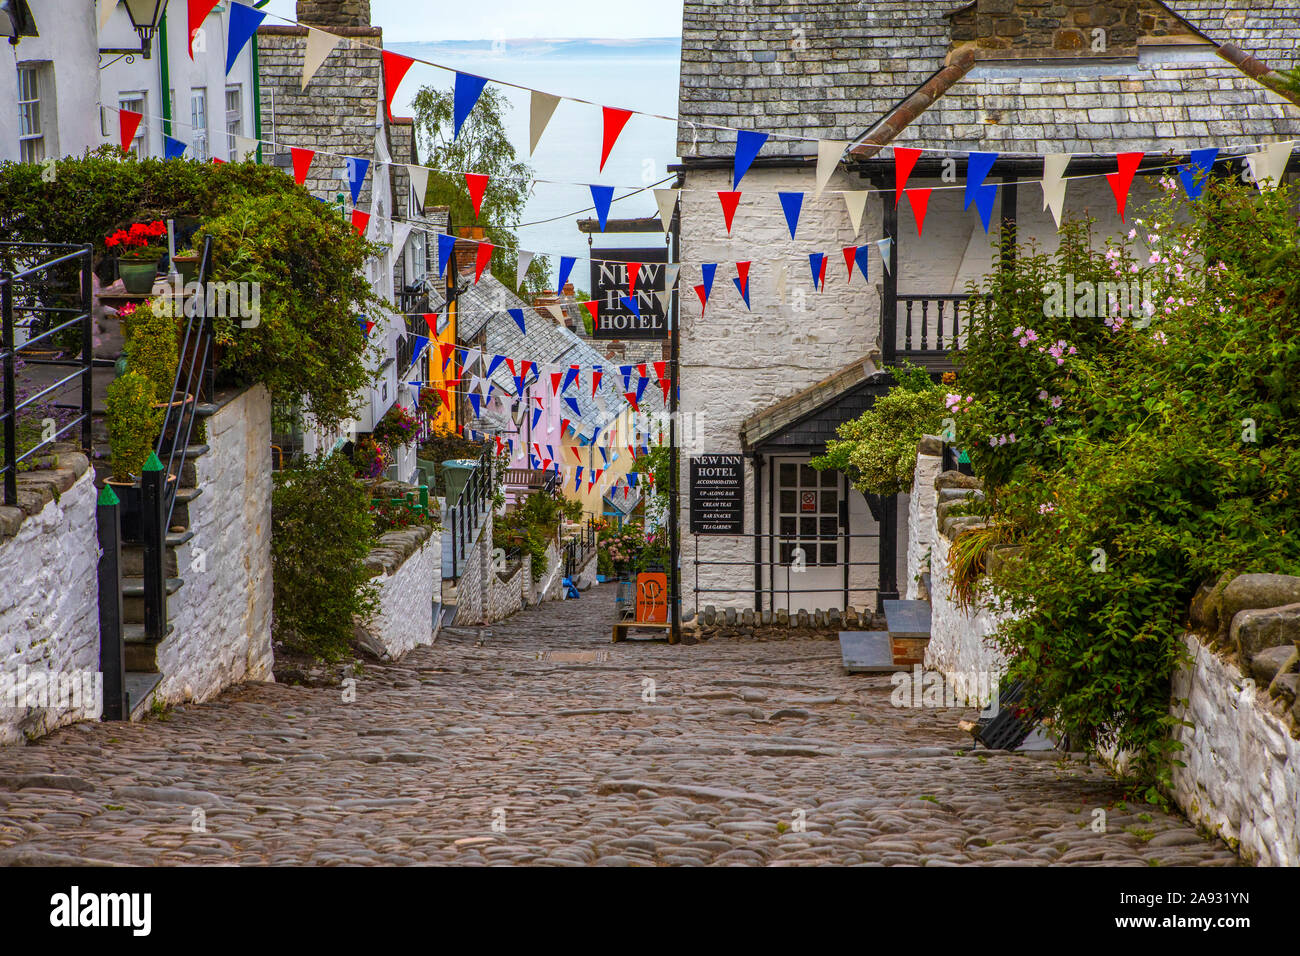 Devon, UK - August 2nd 2019: A view down the picturesque cobbled main street of the fishing village of Clovelly in North Devon, UK. Stock Photo